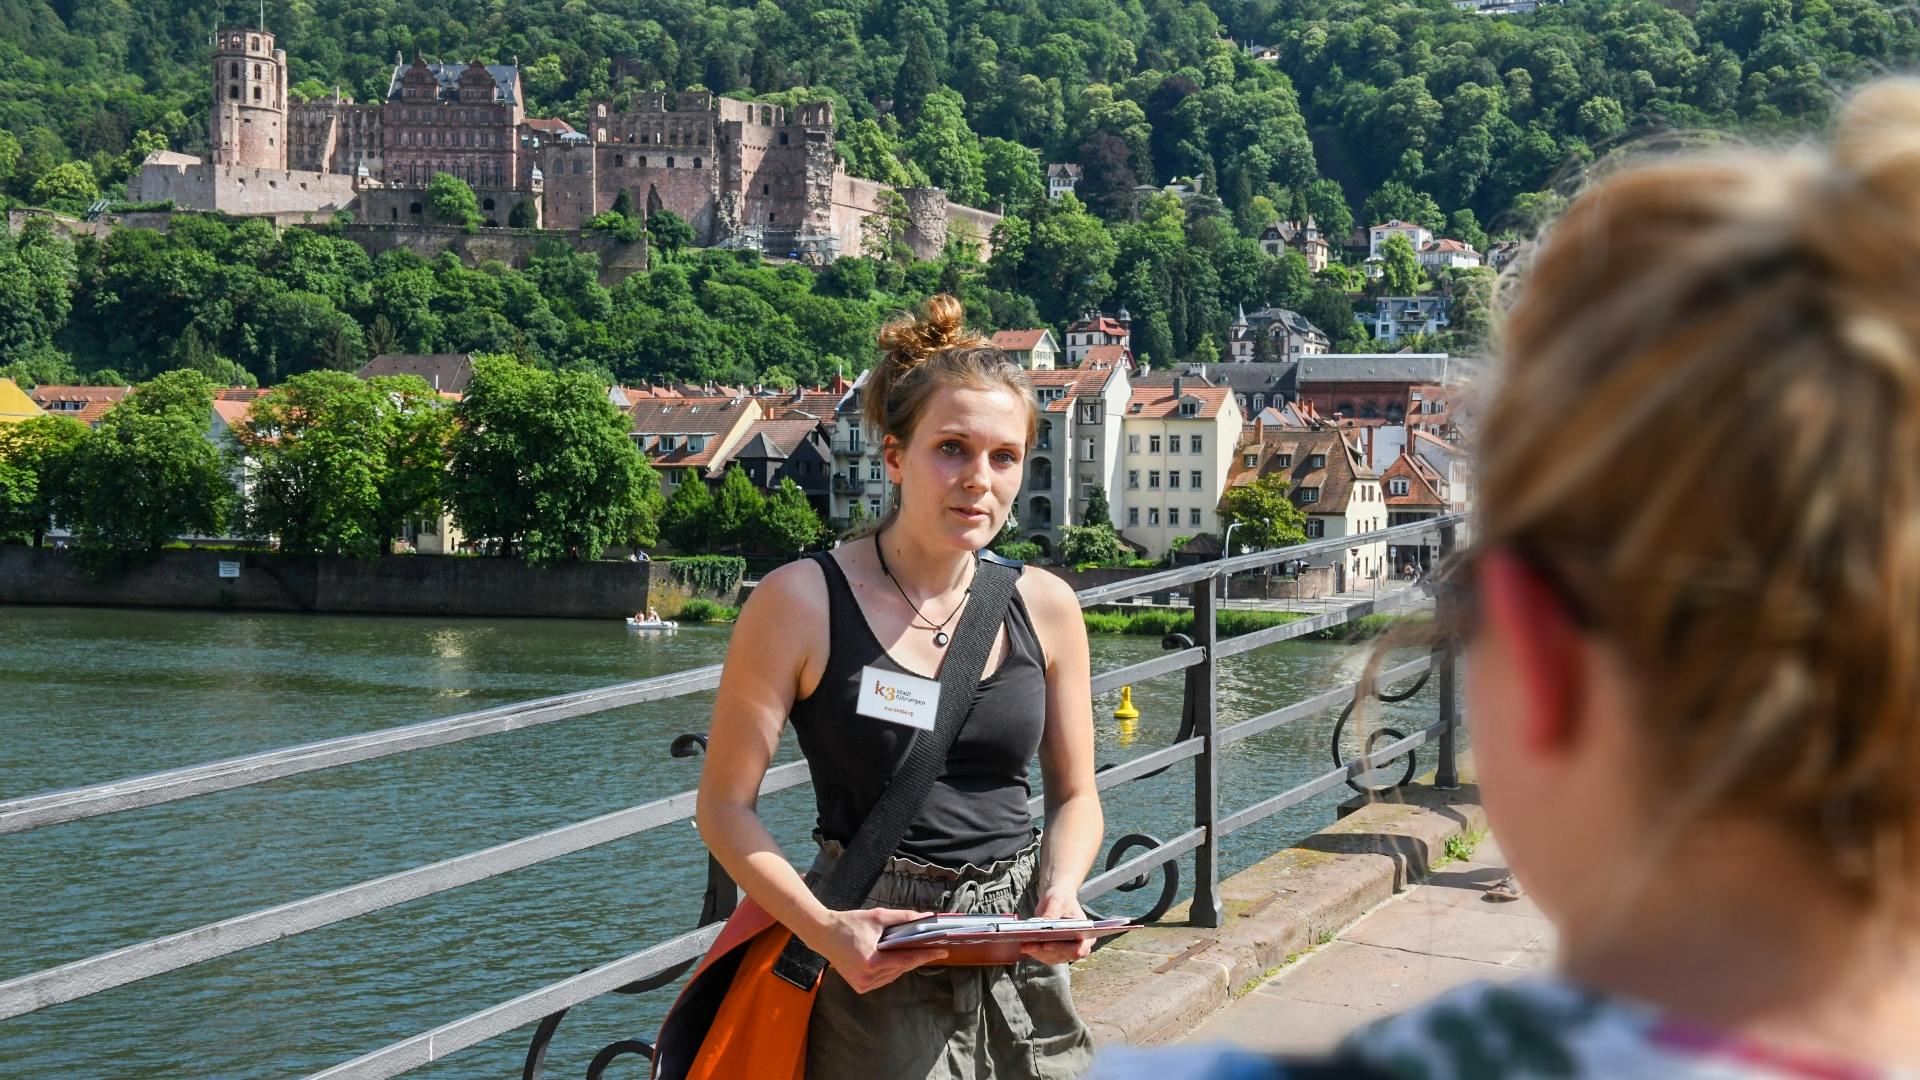 Guided tour of Heidelberg´s Old Town